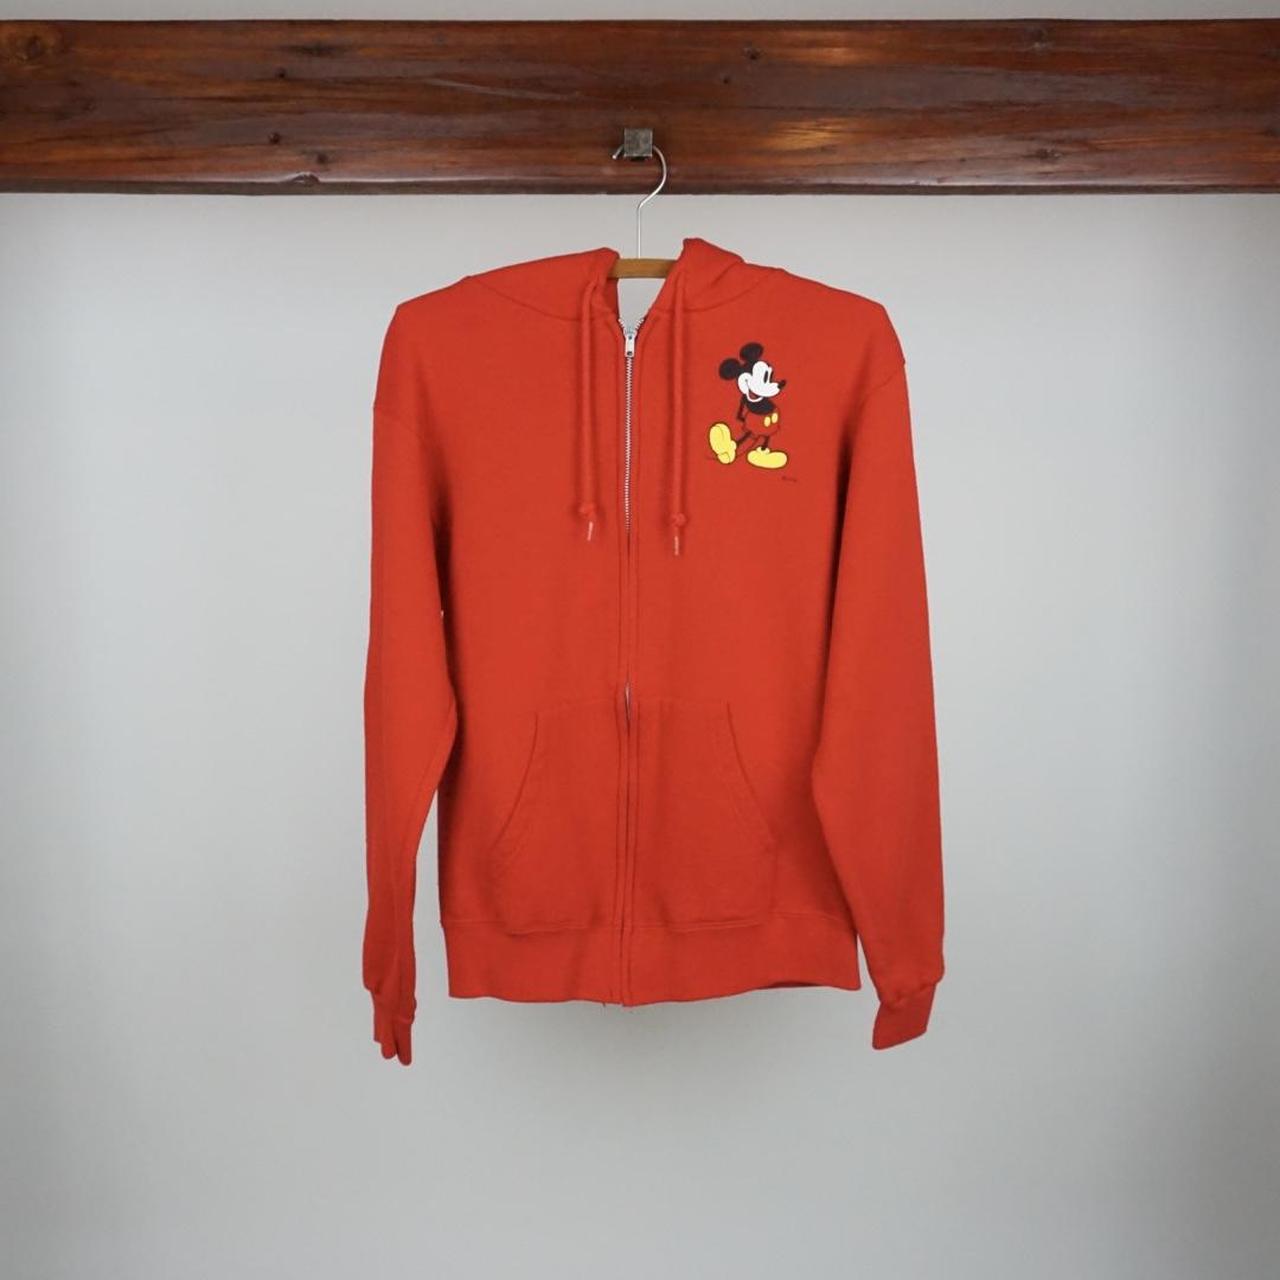 Product Image 1 - Mickey Mouse Disney Zip-up Hoodie

***